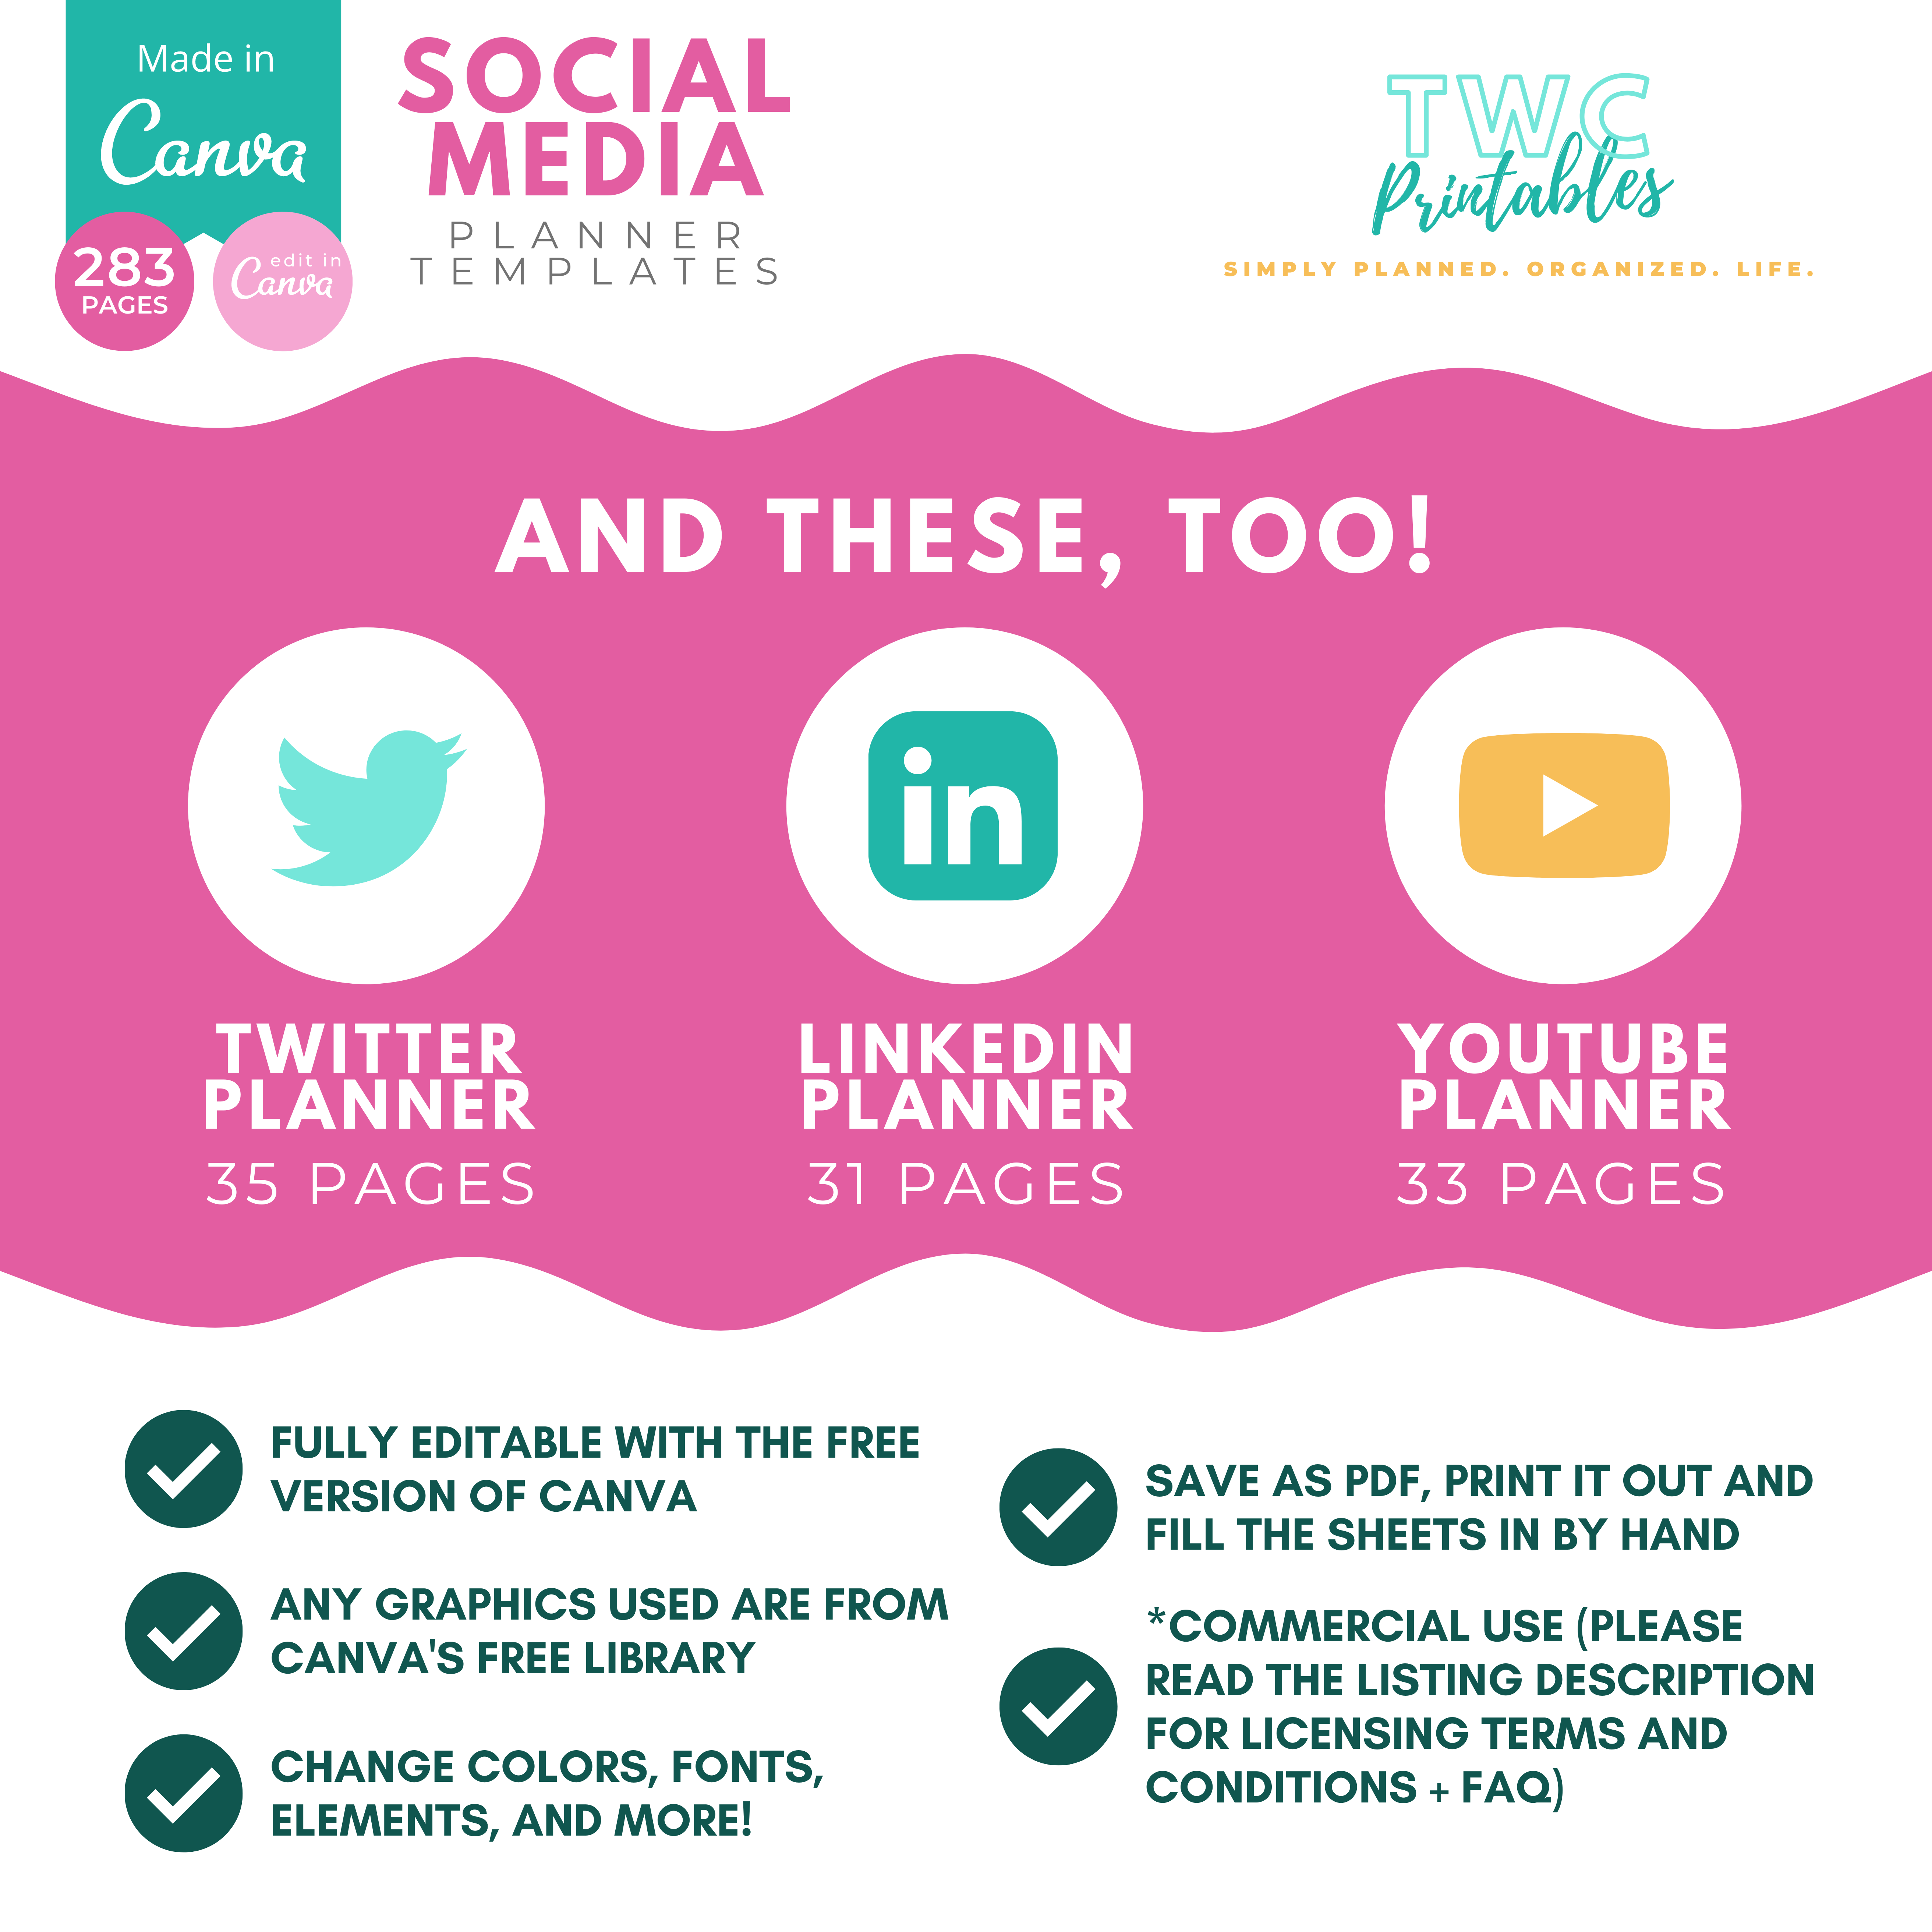 This is THE ULTIMATE Social Media Planner Canva Template! With over 250 pages, you can create all the planners you need for your social media accounts. Create your Pinterest Planner, YouTube Planner, and all other social platform planners for Instagram, Facebook, TikTok, LinkedIn, and Twitter. Using Social Media Canva templates means that you can change things around to suit your needs!